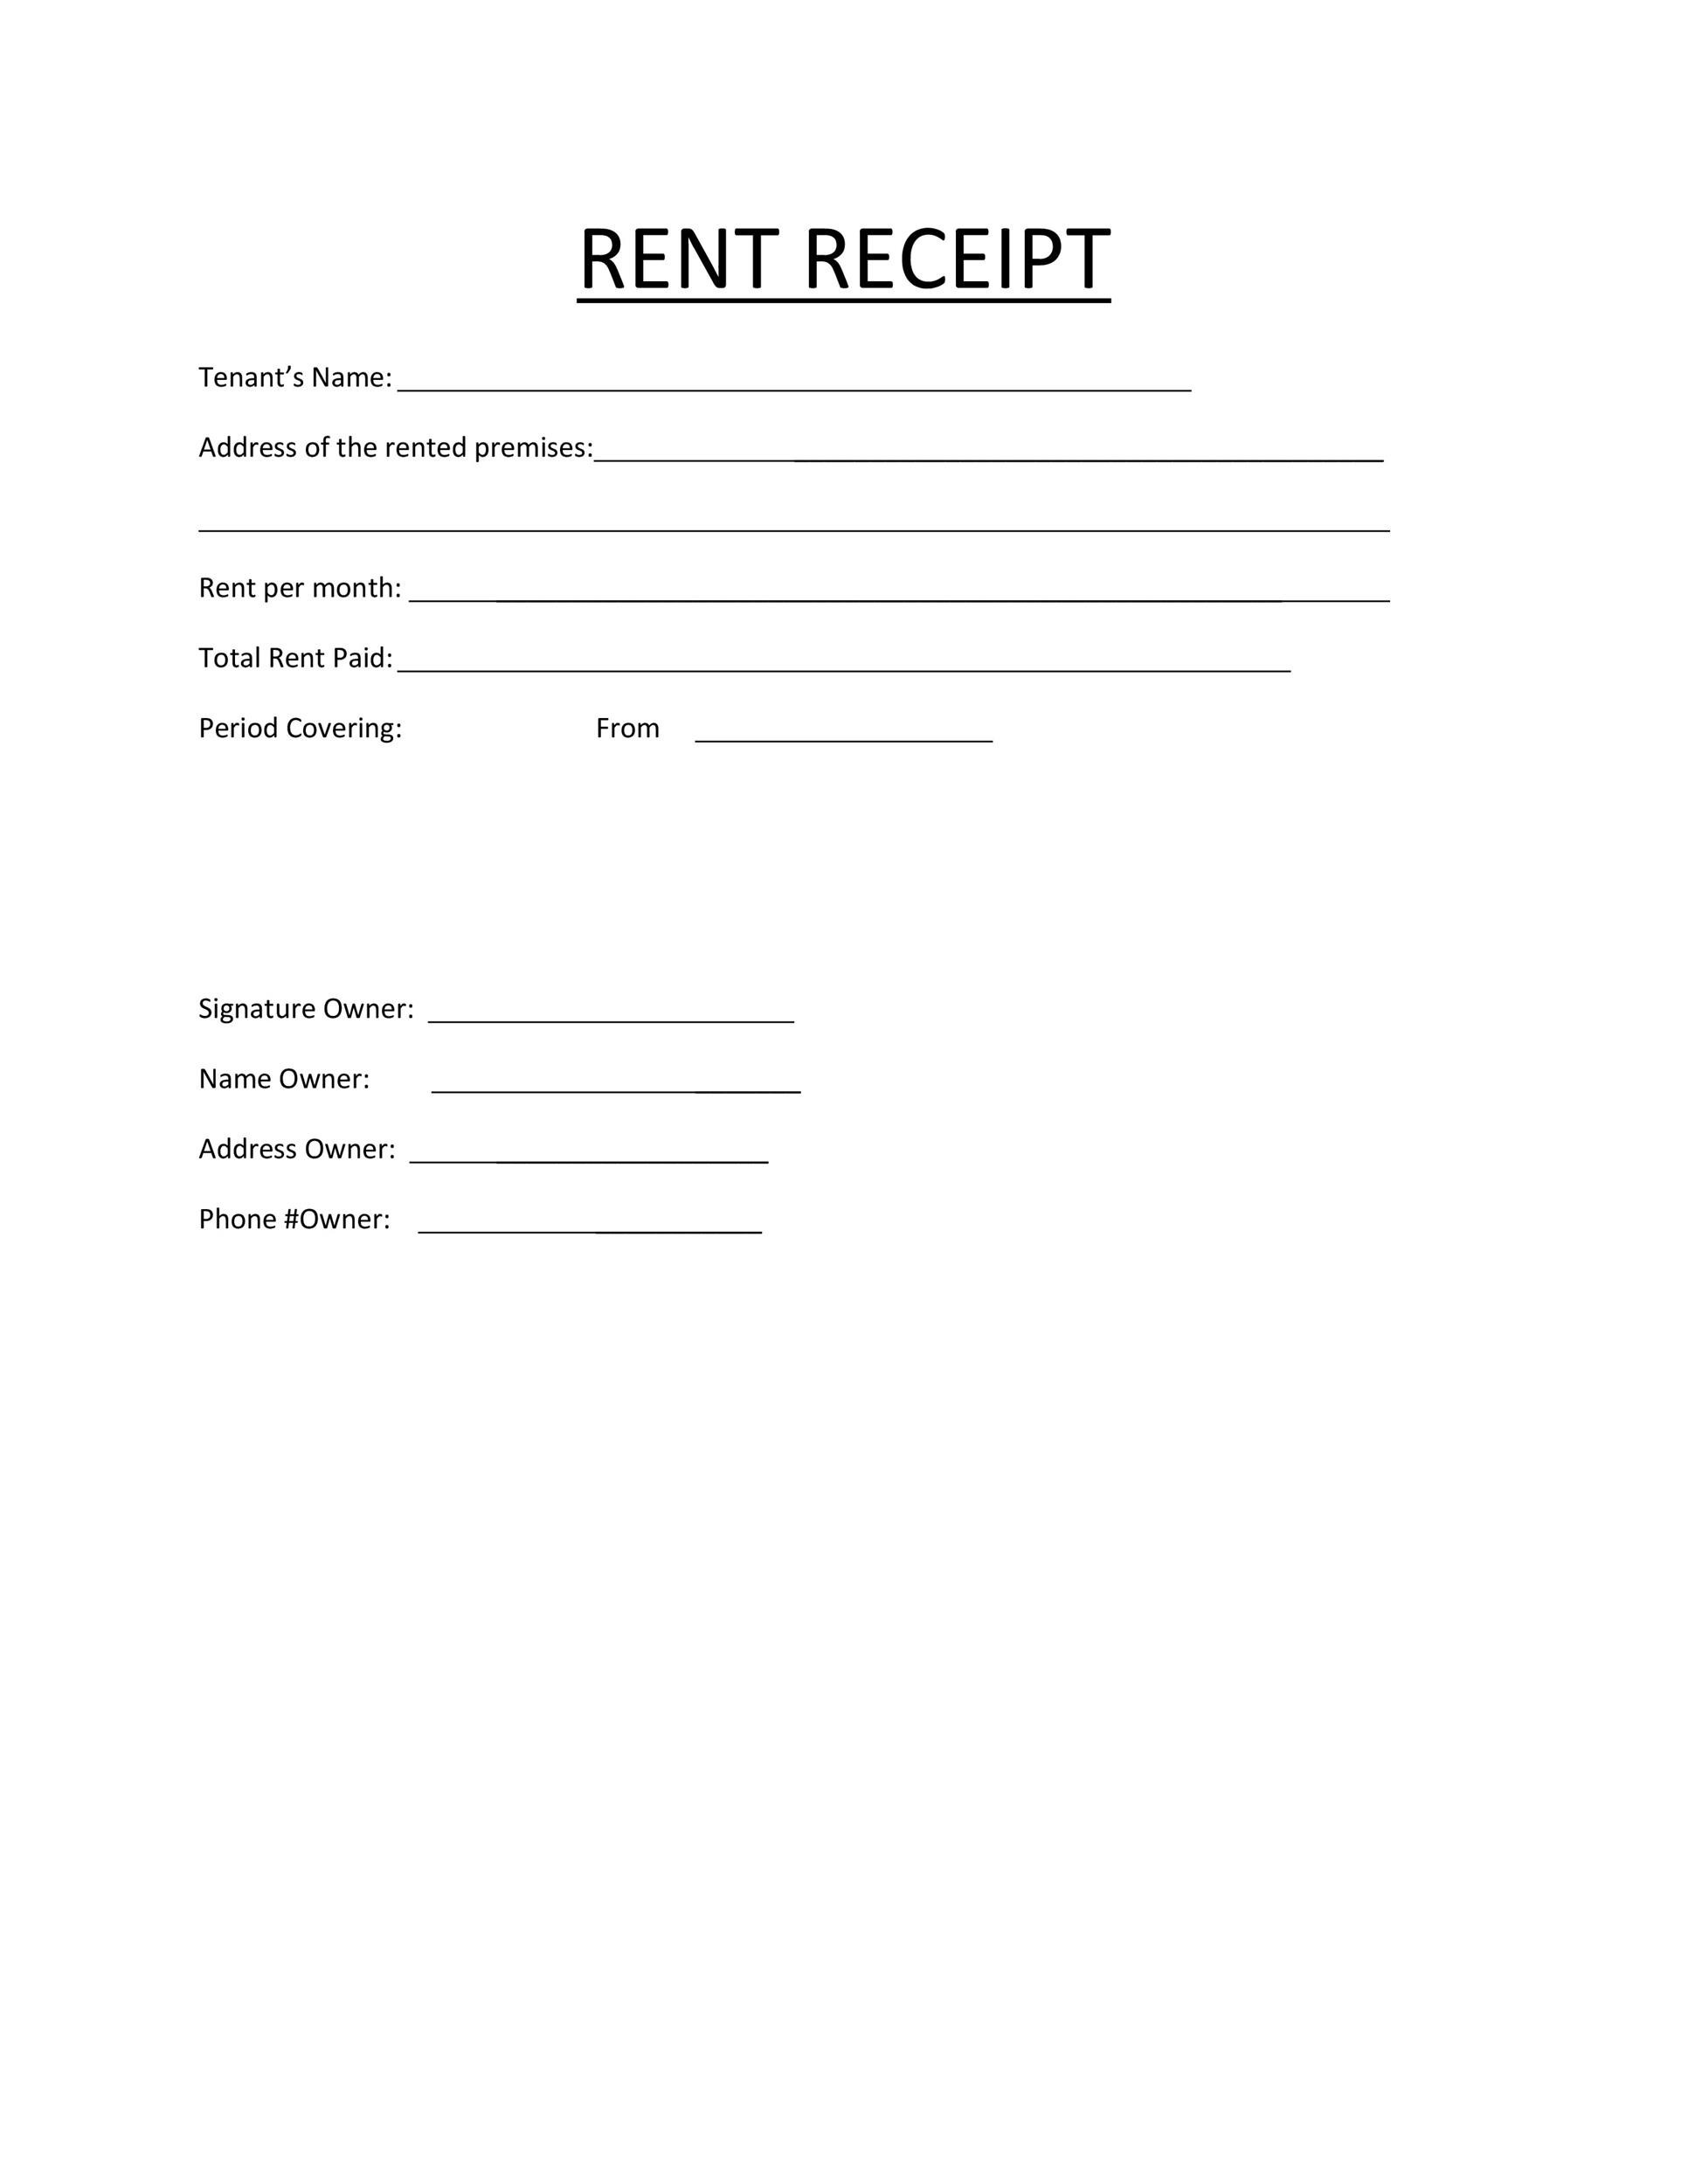 template-for-rent-receipt-india-beautiful-printable-receipt-templates